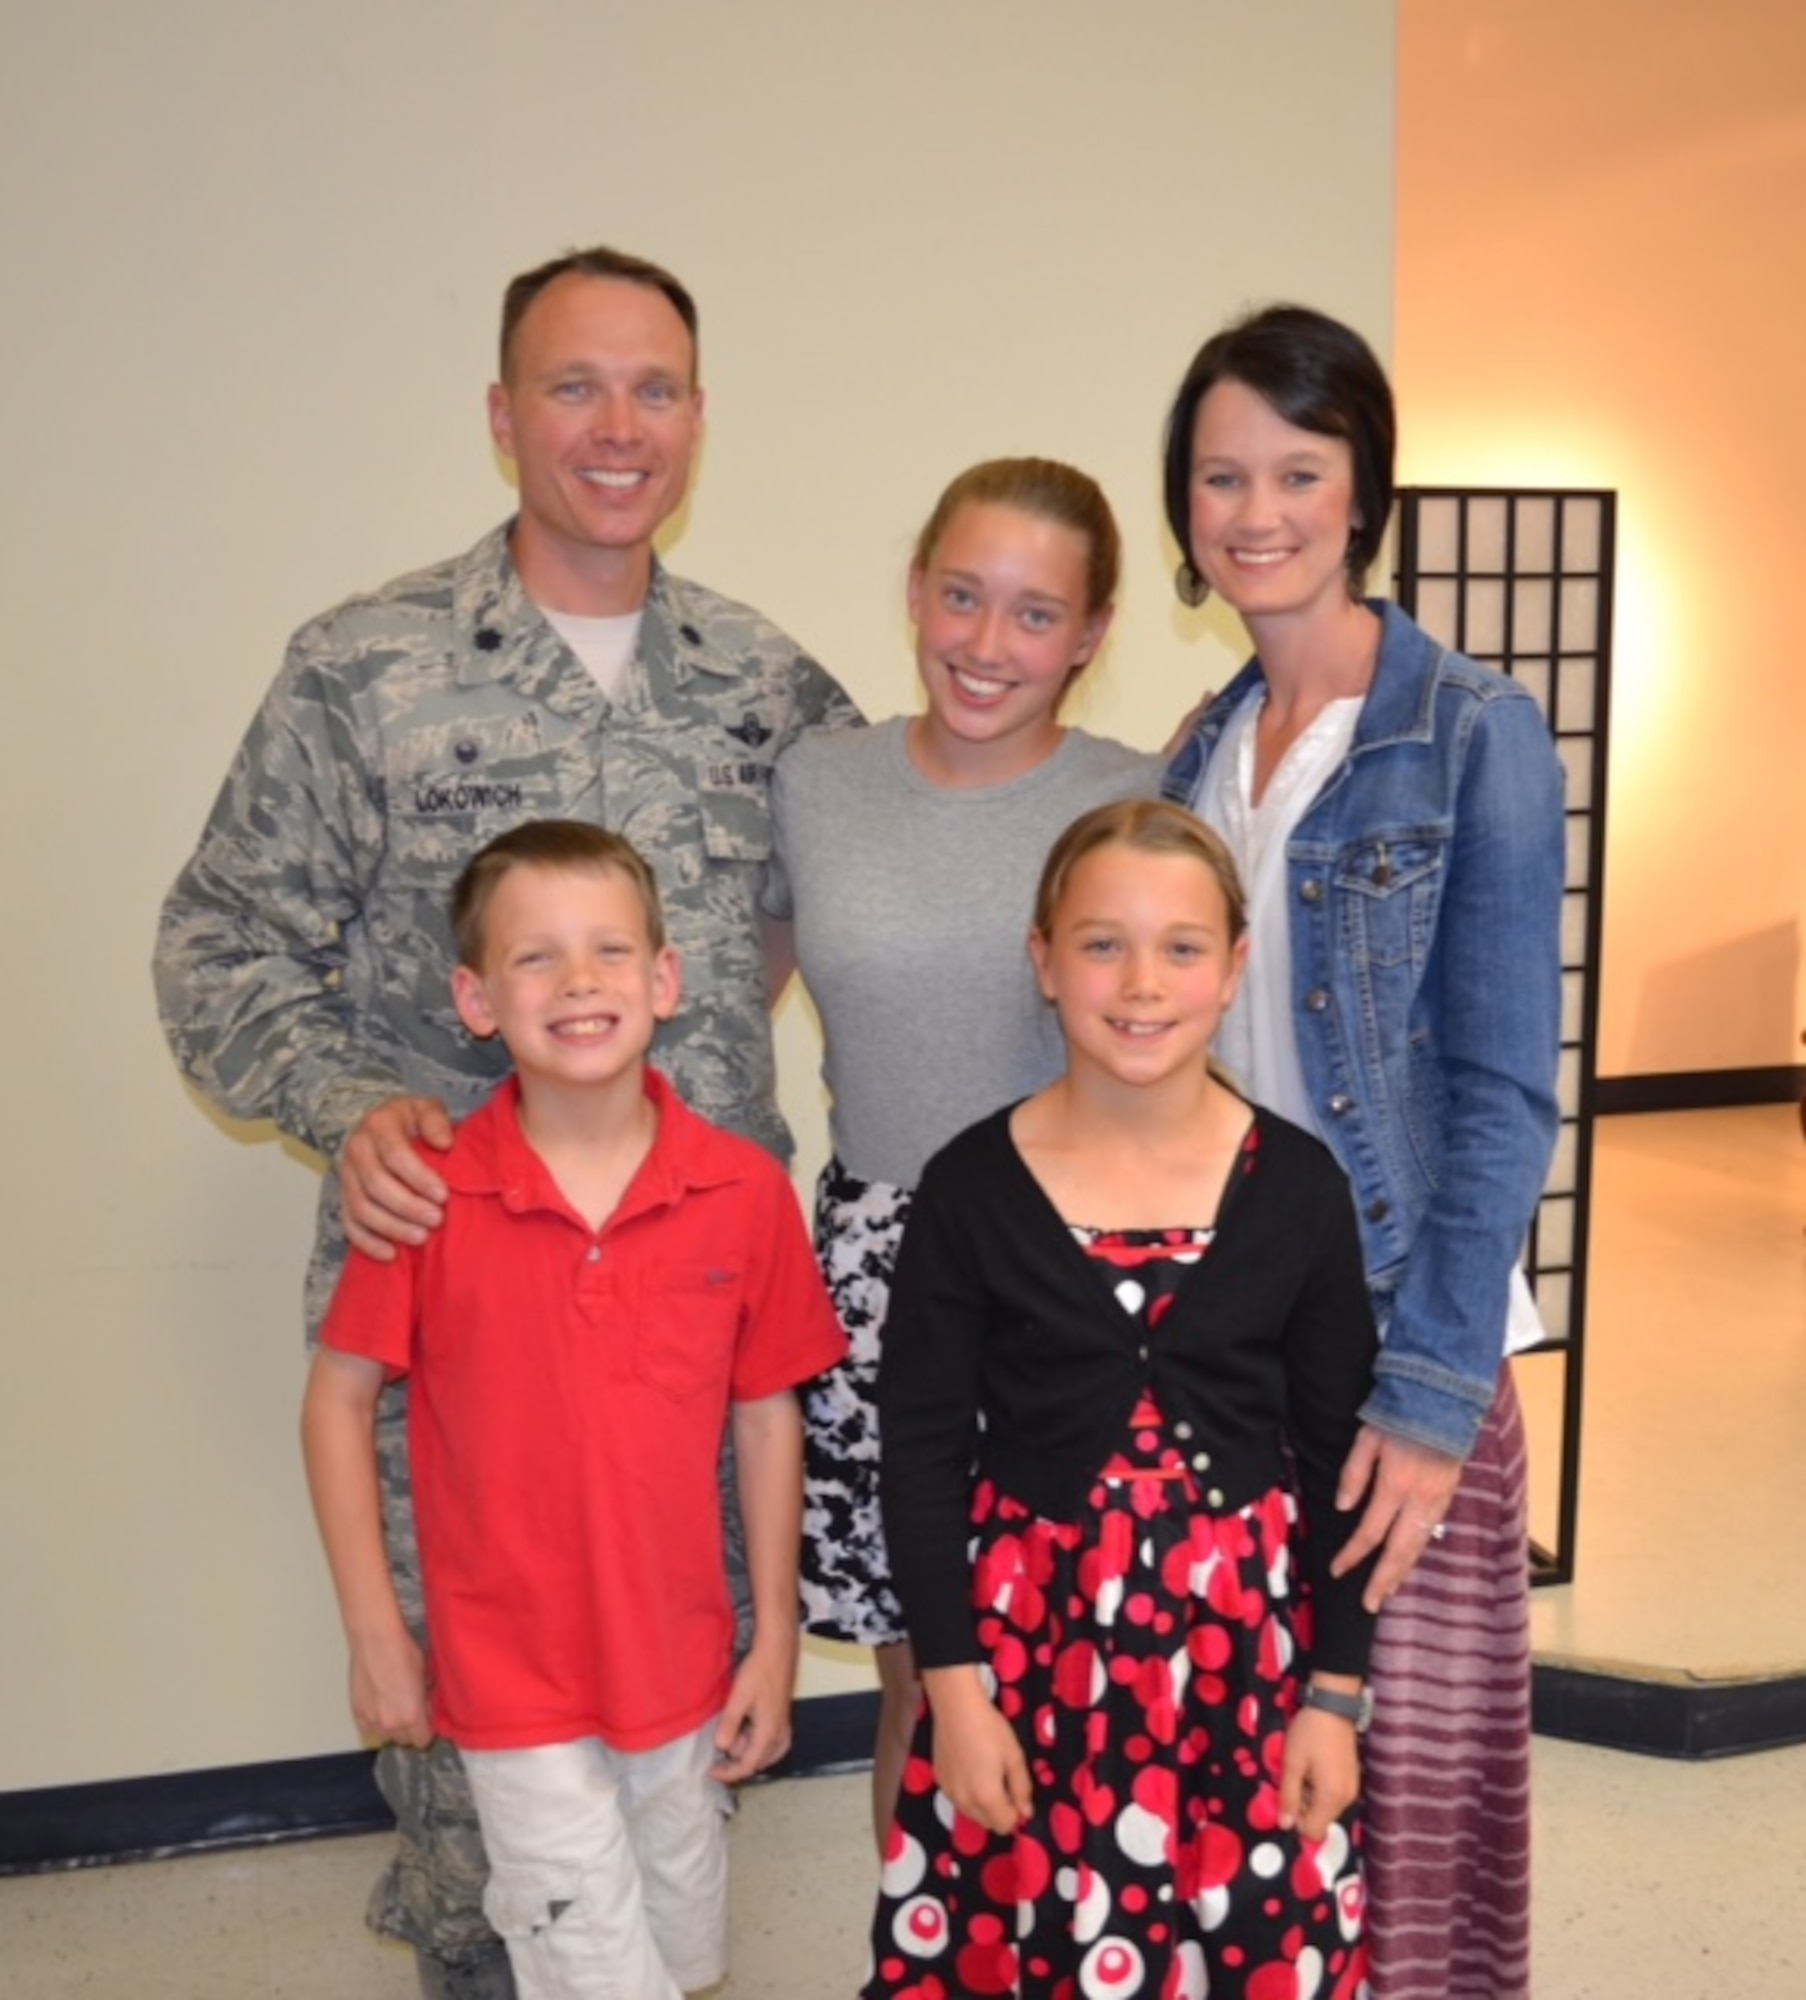 Lt. Col. Luke Lokowich, the 5th Reconnaissance Squadron commander, his wife Lindsey and his chidren Avery, Jacob, and Abigail, at Osan Air Base, South Korea. Fifteen years ago, Lokowich’s lost his wife, JoAnne when she suffered a cerebral hemorrhaging due to an aneurism. With the support of his family and friends, and healthy coping methods, Lokowich has been resilient, and has since remarried and still celebrates JoAnne’s life. (Courtesy photo)